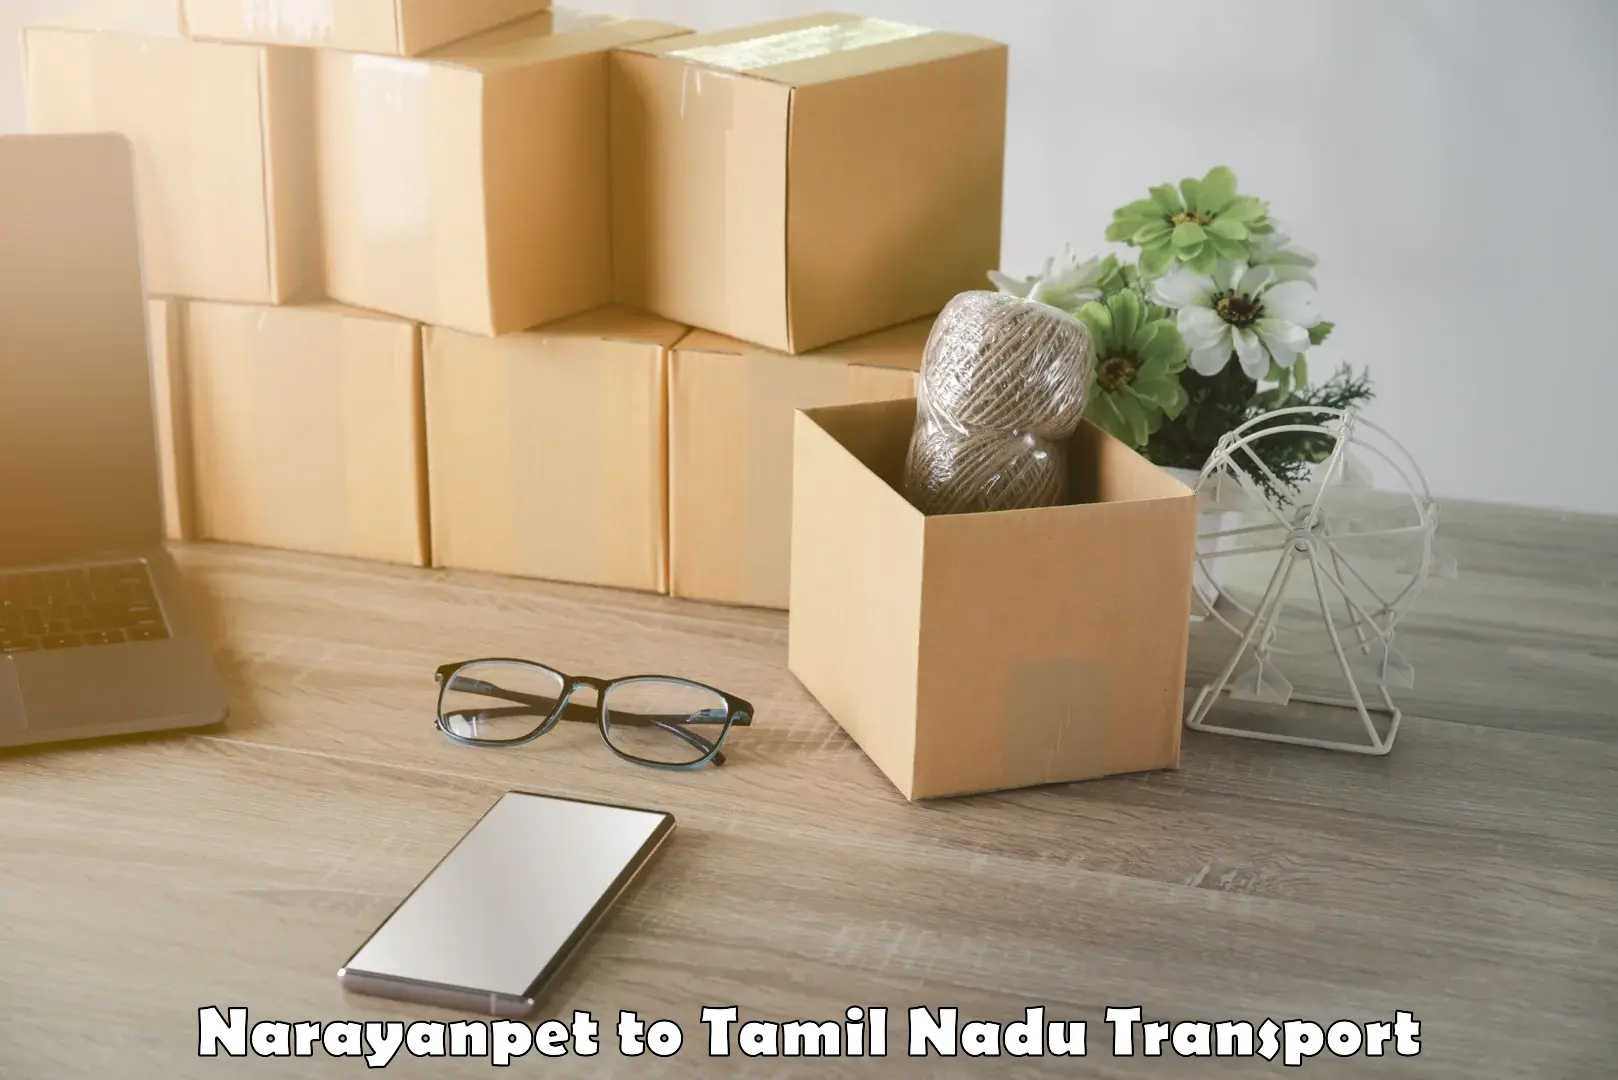 Delivery service Narayanpet to St Thomas Mount